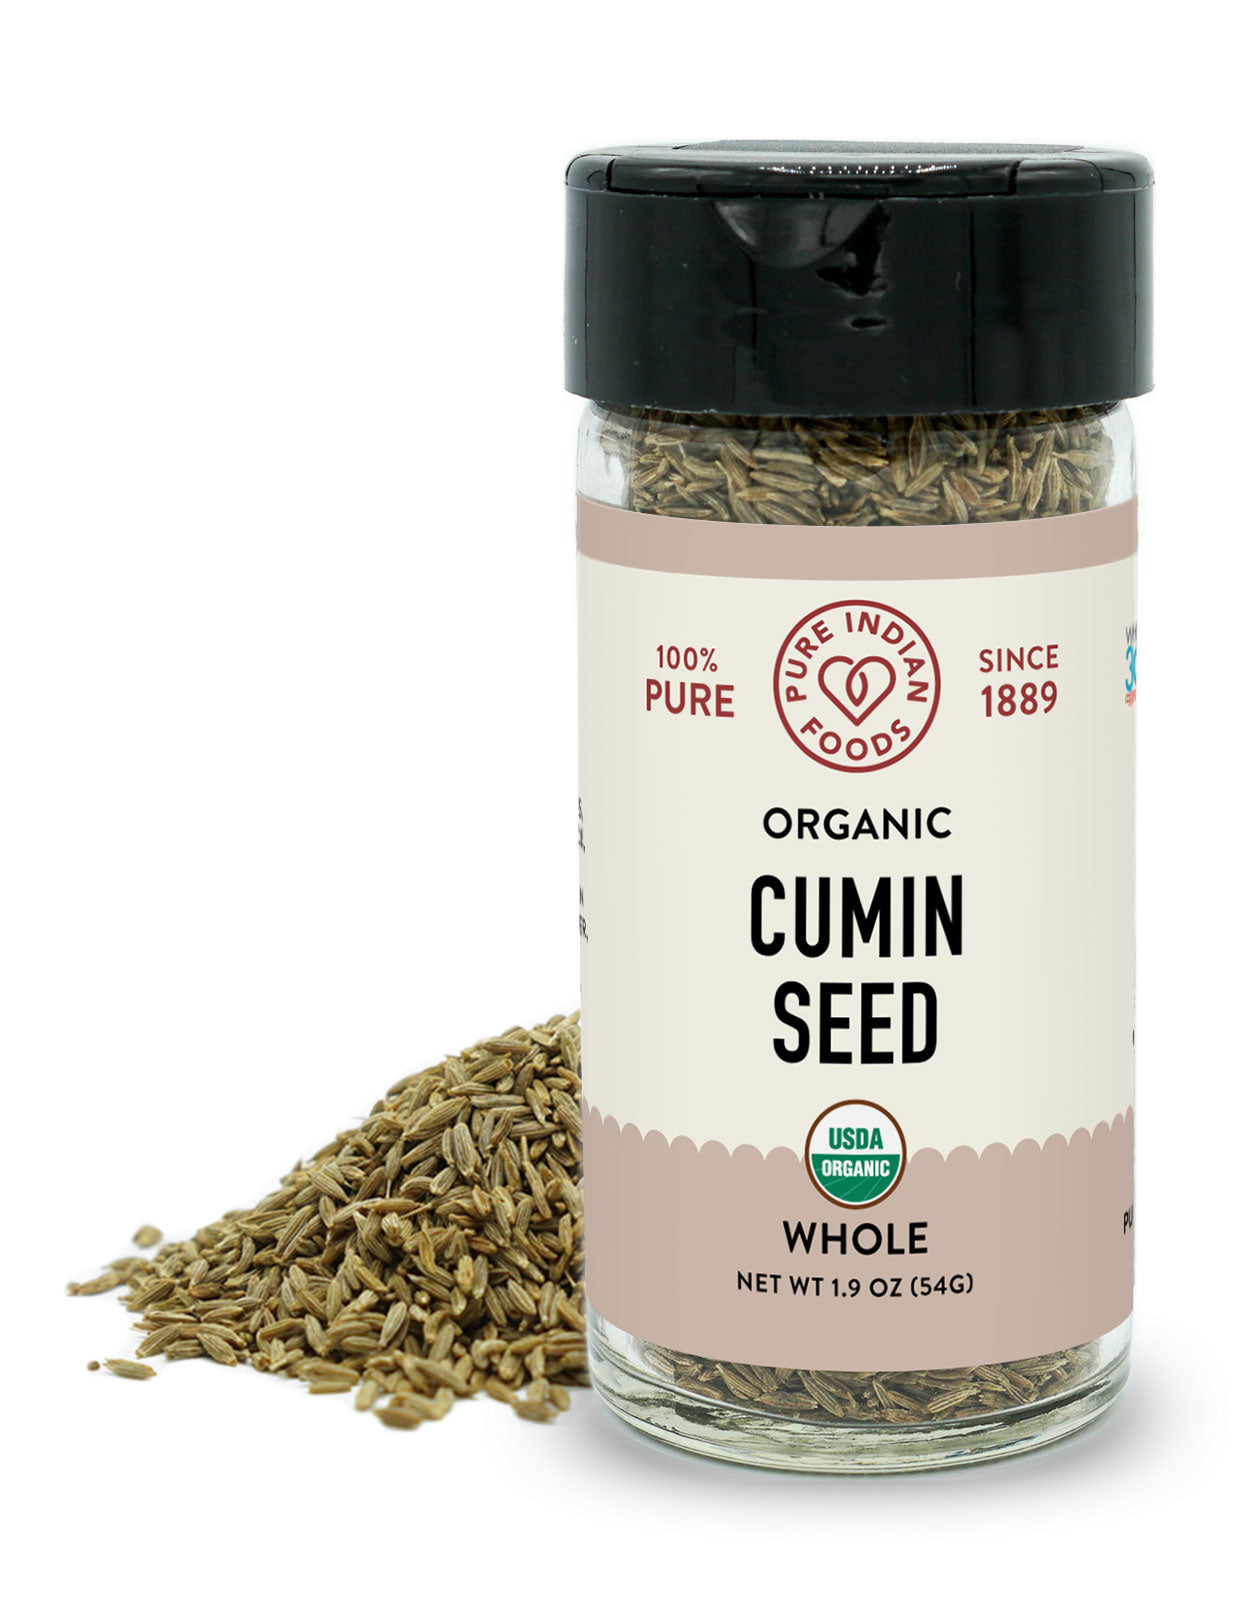 Whole jeera seeds from Pure Indian Food, also known as organic white cumin seed.